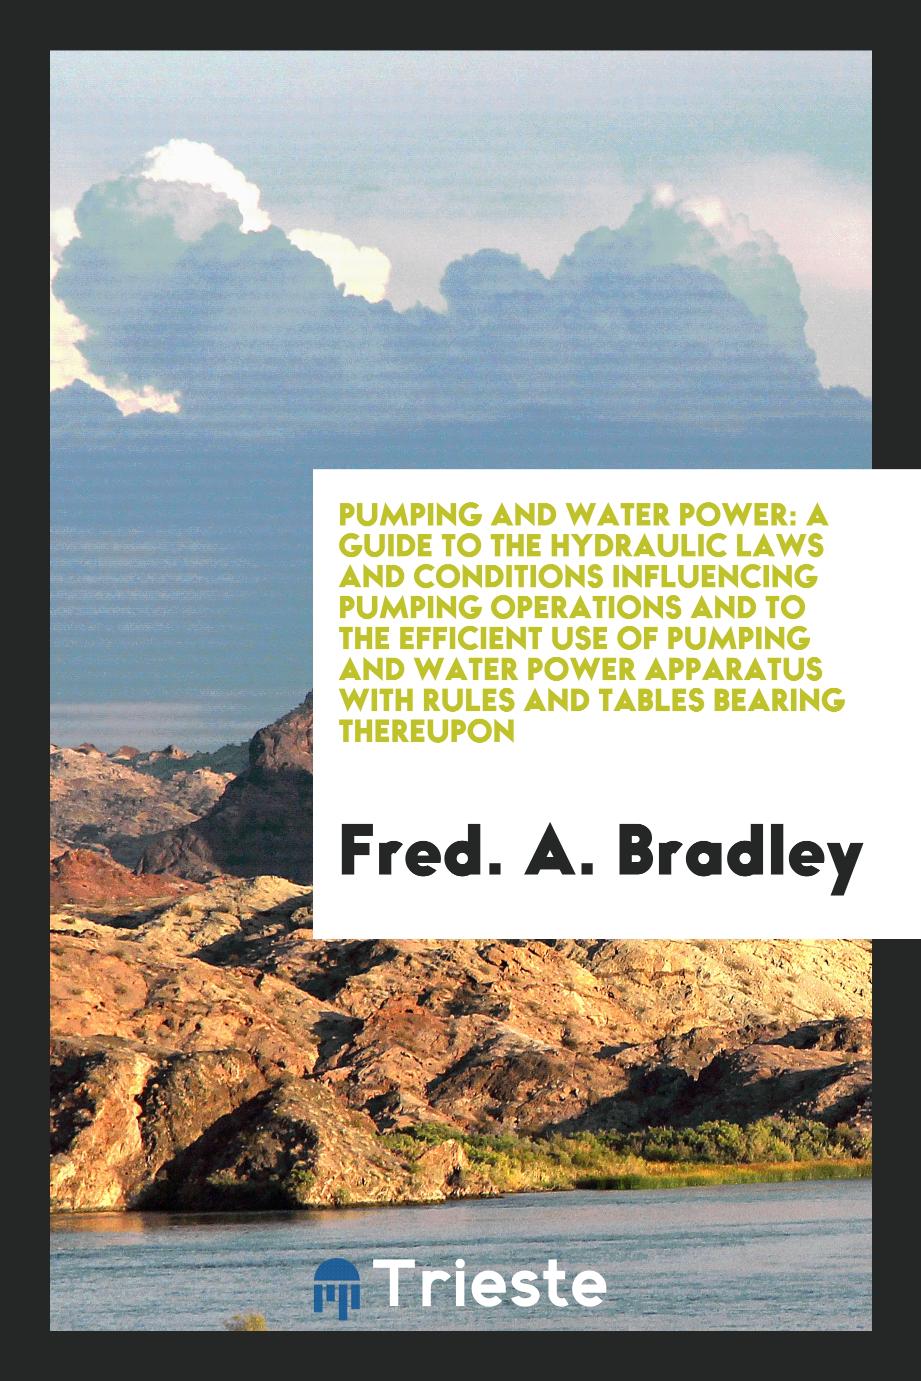 Pumping and Water Power: A Guide to the Hydraulic Laws and Conditions Influencing Pumping Operations and to the Efficient Use of Pumping and Water Power Apparatus with Rules and Tables Bearing Thereupon